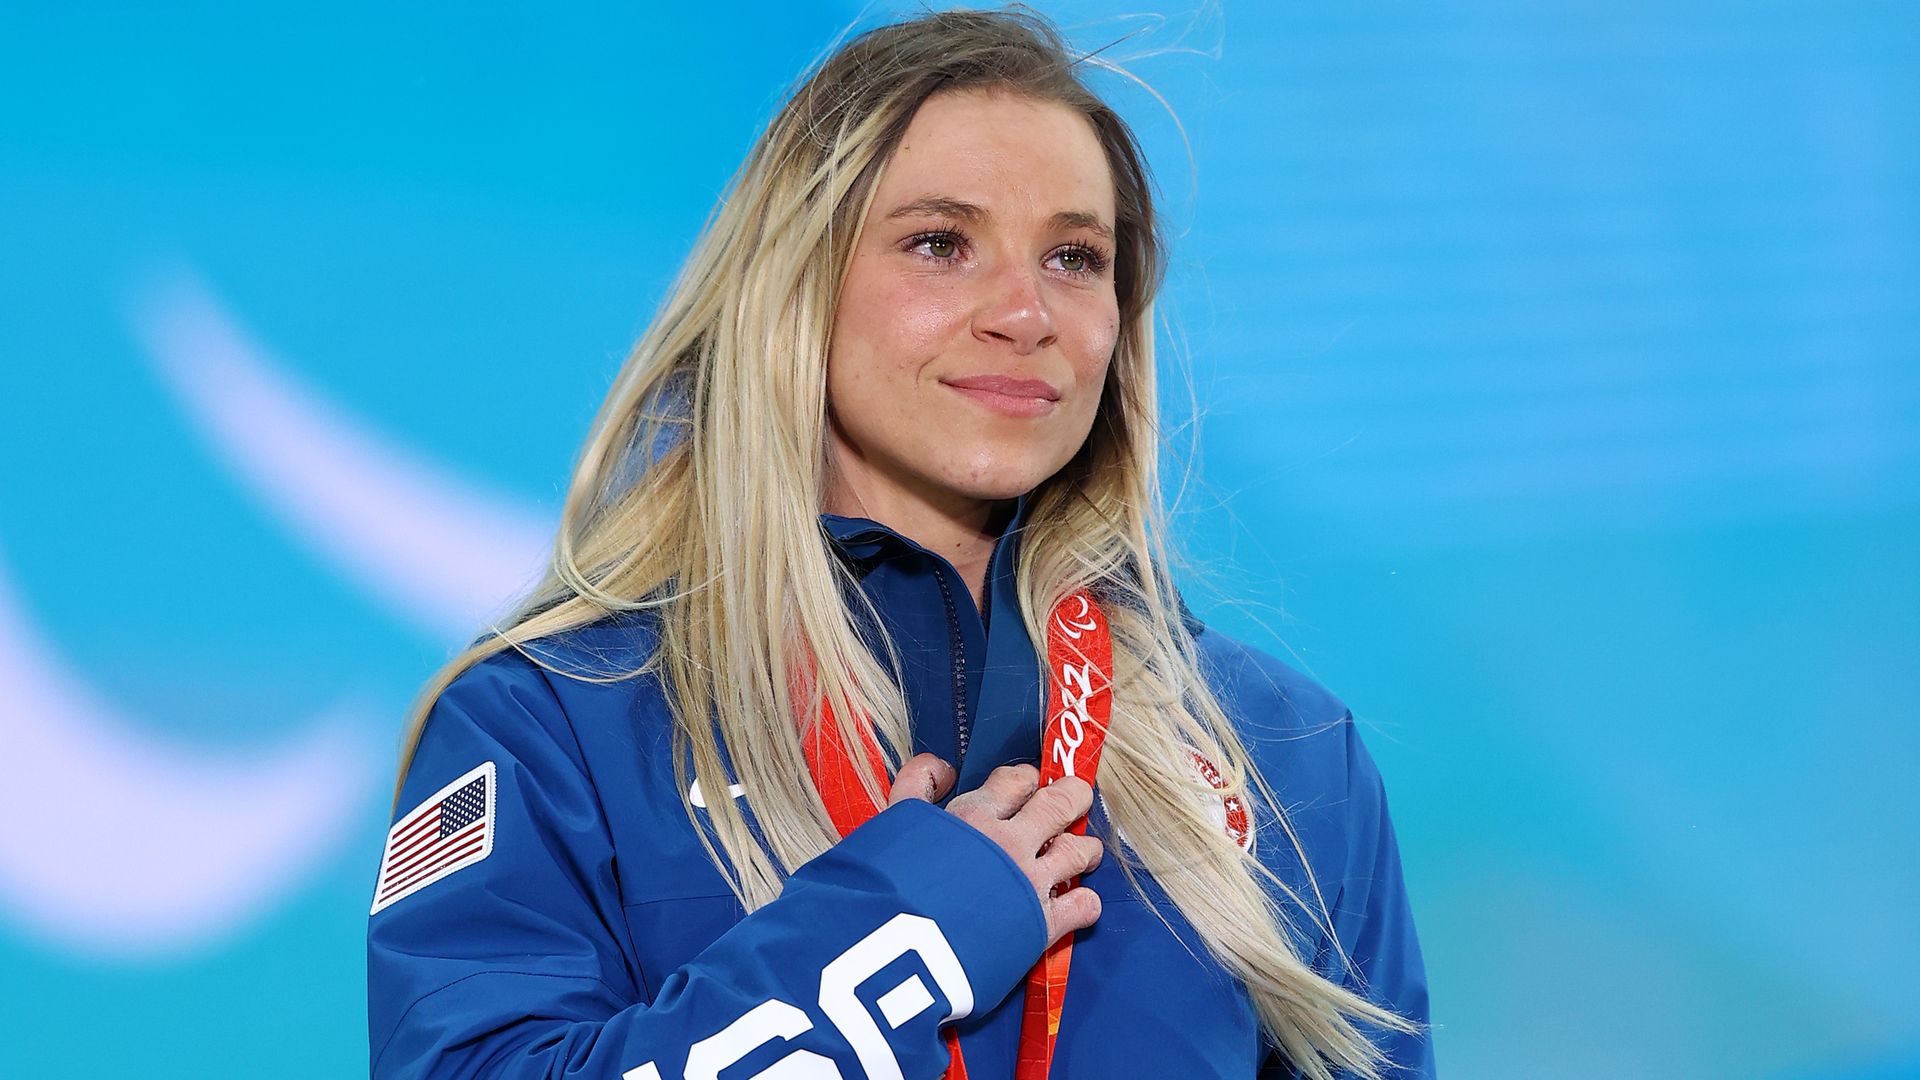 Gold medalist Oksana Masters of Team USA during the Para Biathlon Women’s Sprint Sitting medal ceremony on day two of the Beijing 2022 Winter Paralympics on March 06, 2022 in Zhangjiakou, China.